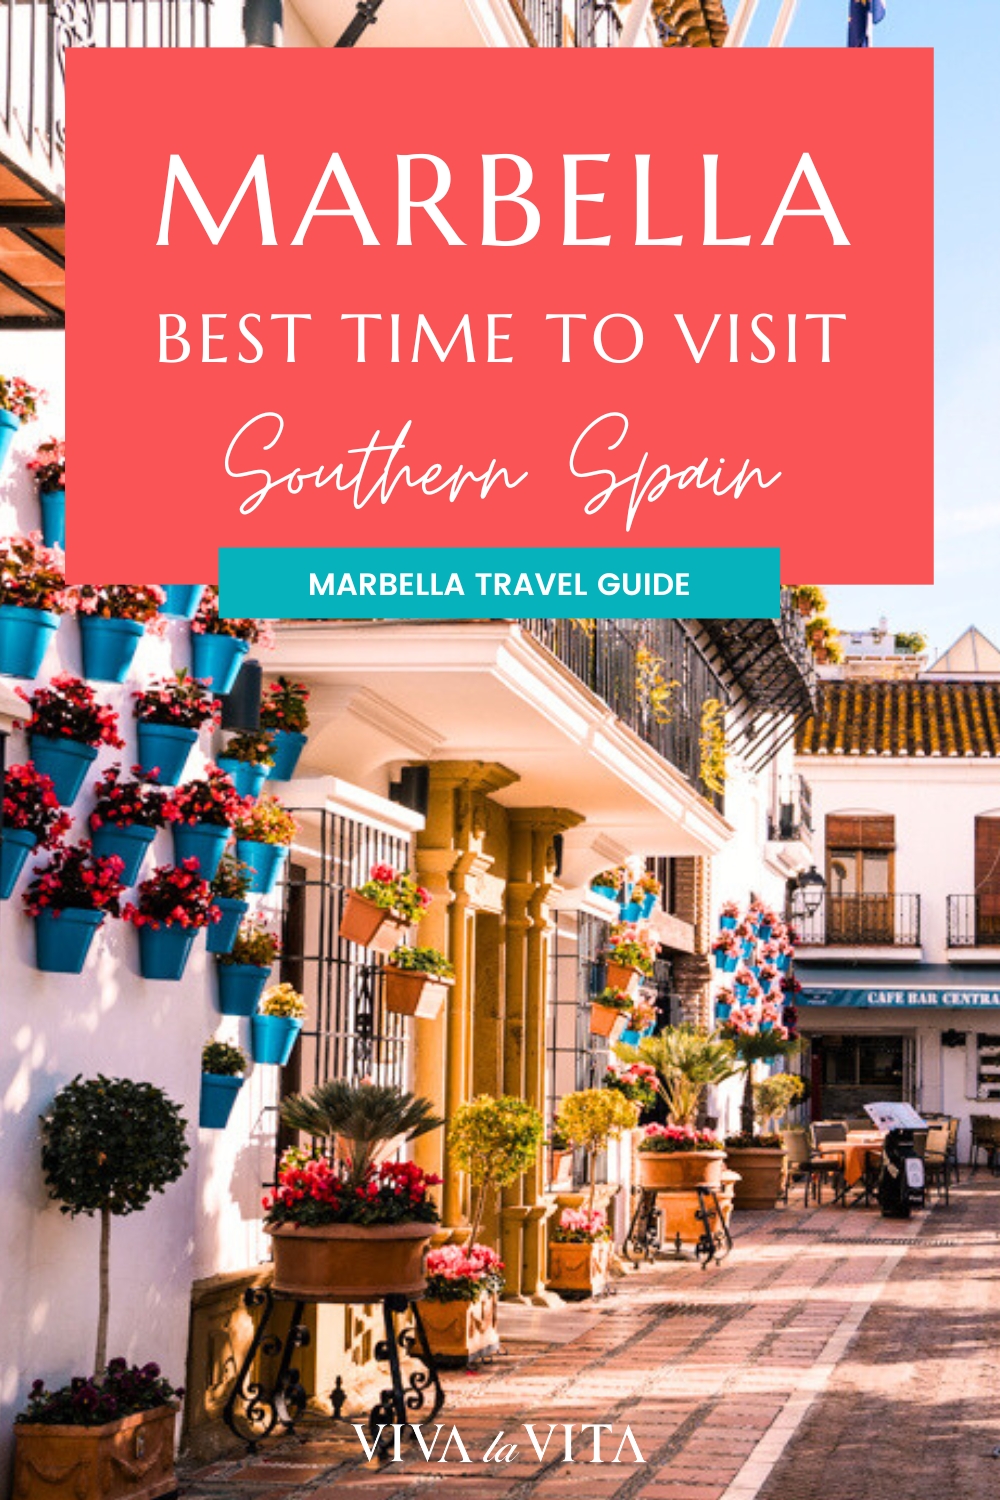 pinterest image showing Marbella old town in Southern Spain, with a headline reading: marbella best time to visit Southern Spain - Marbella travel guide